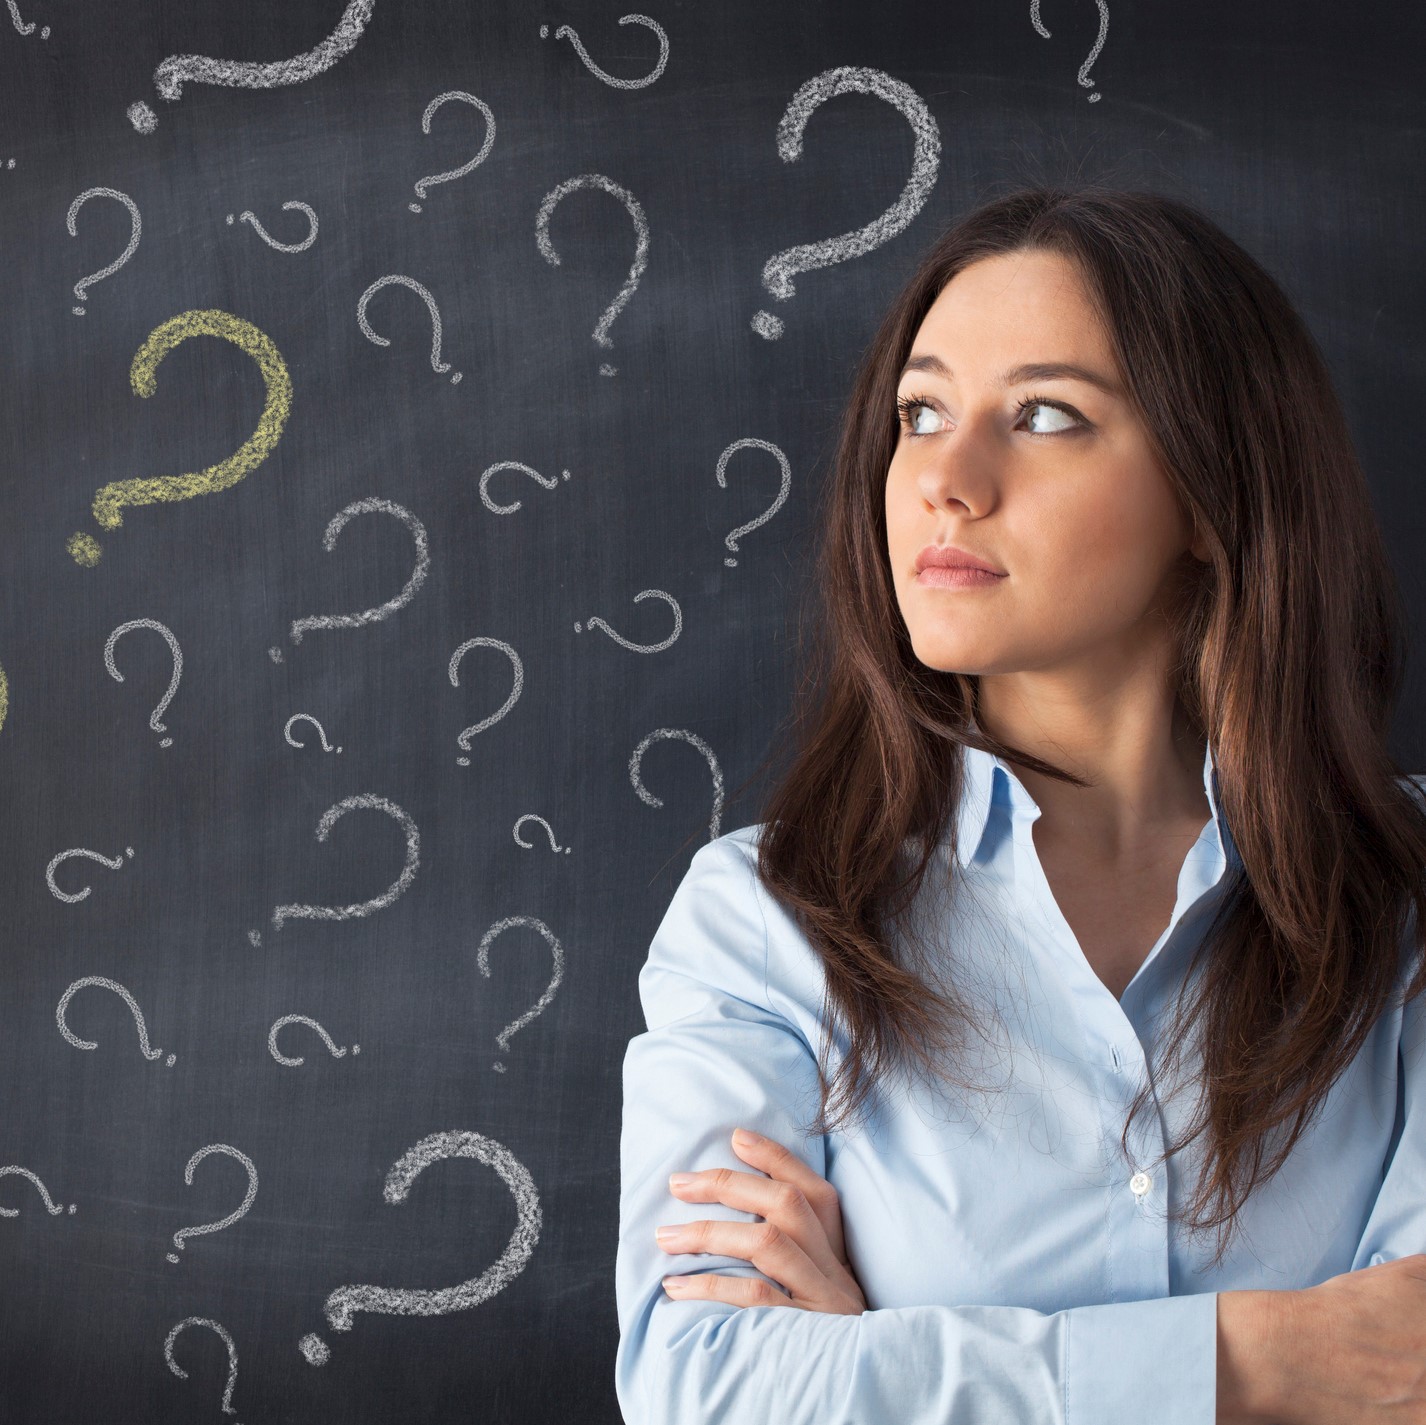 Woman in front of question marks drawn on blackboard